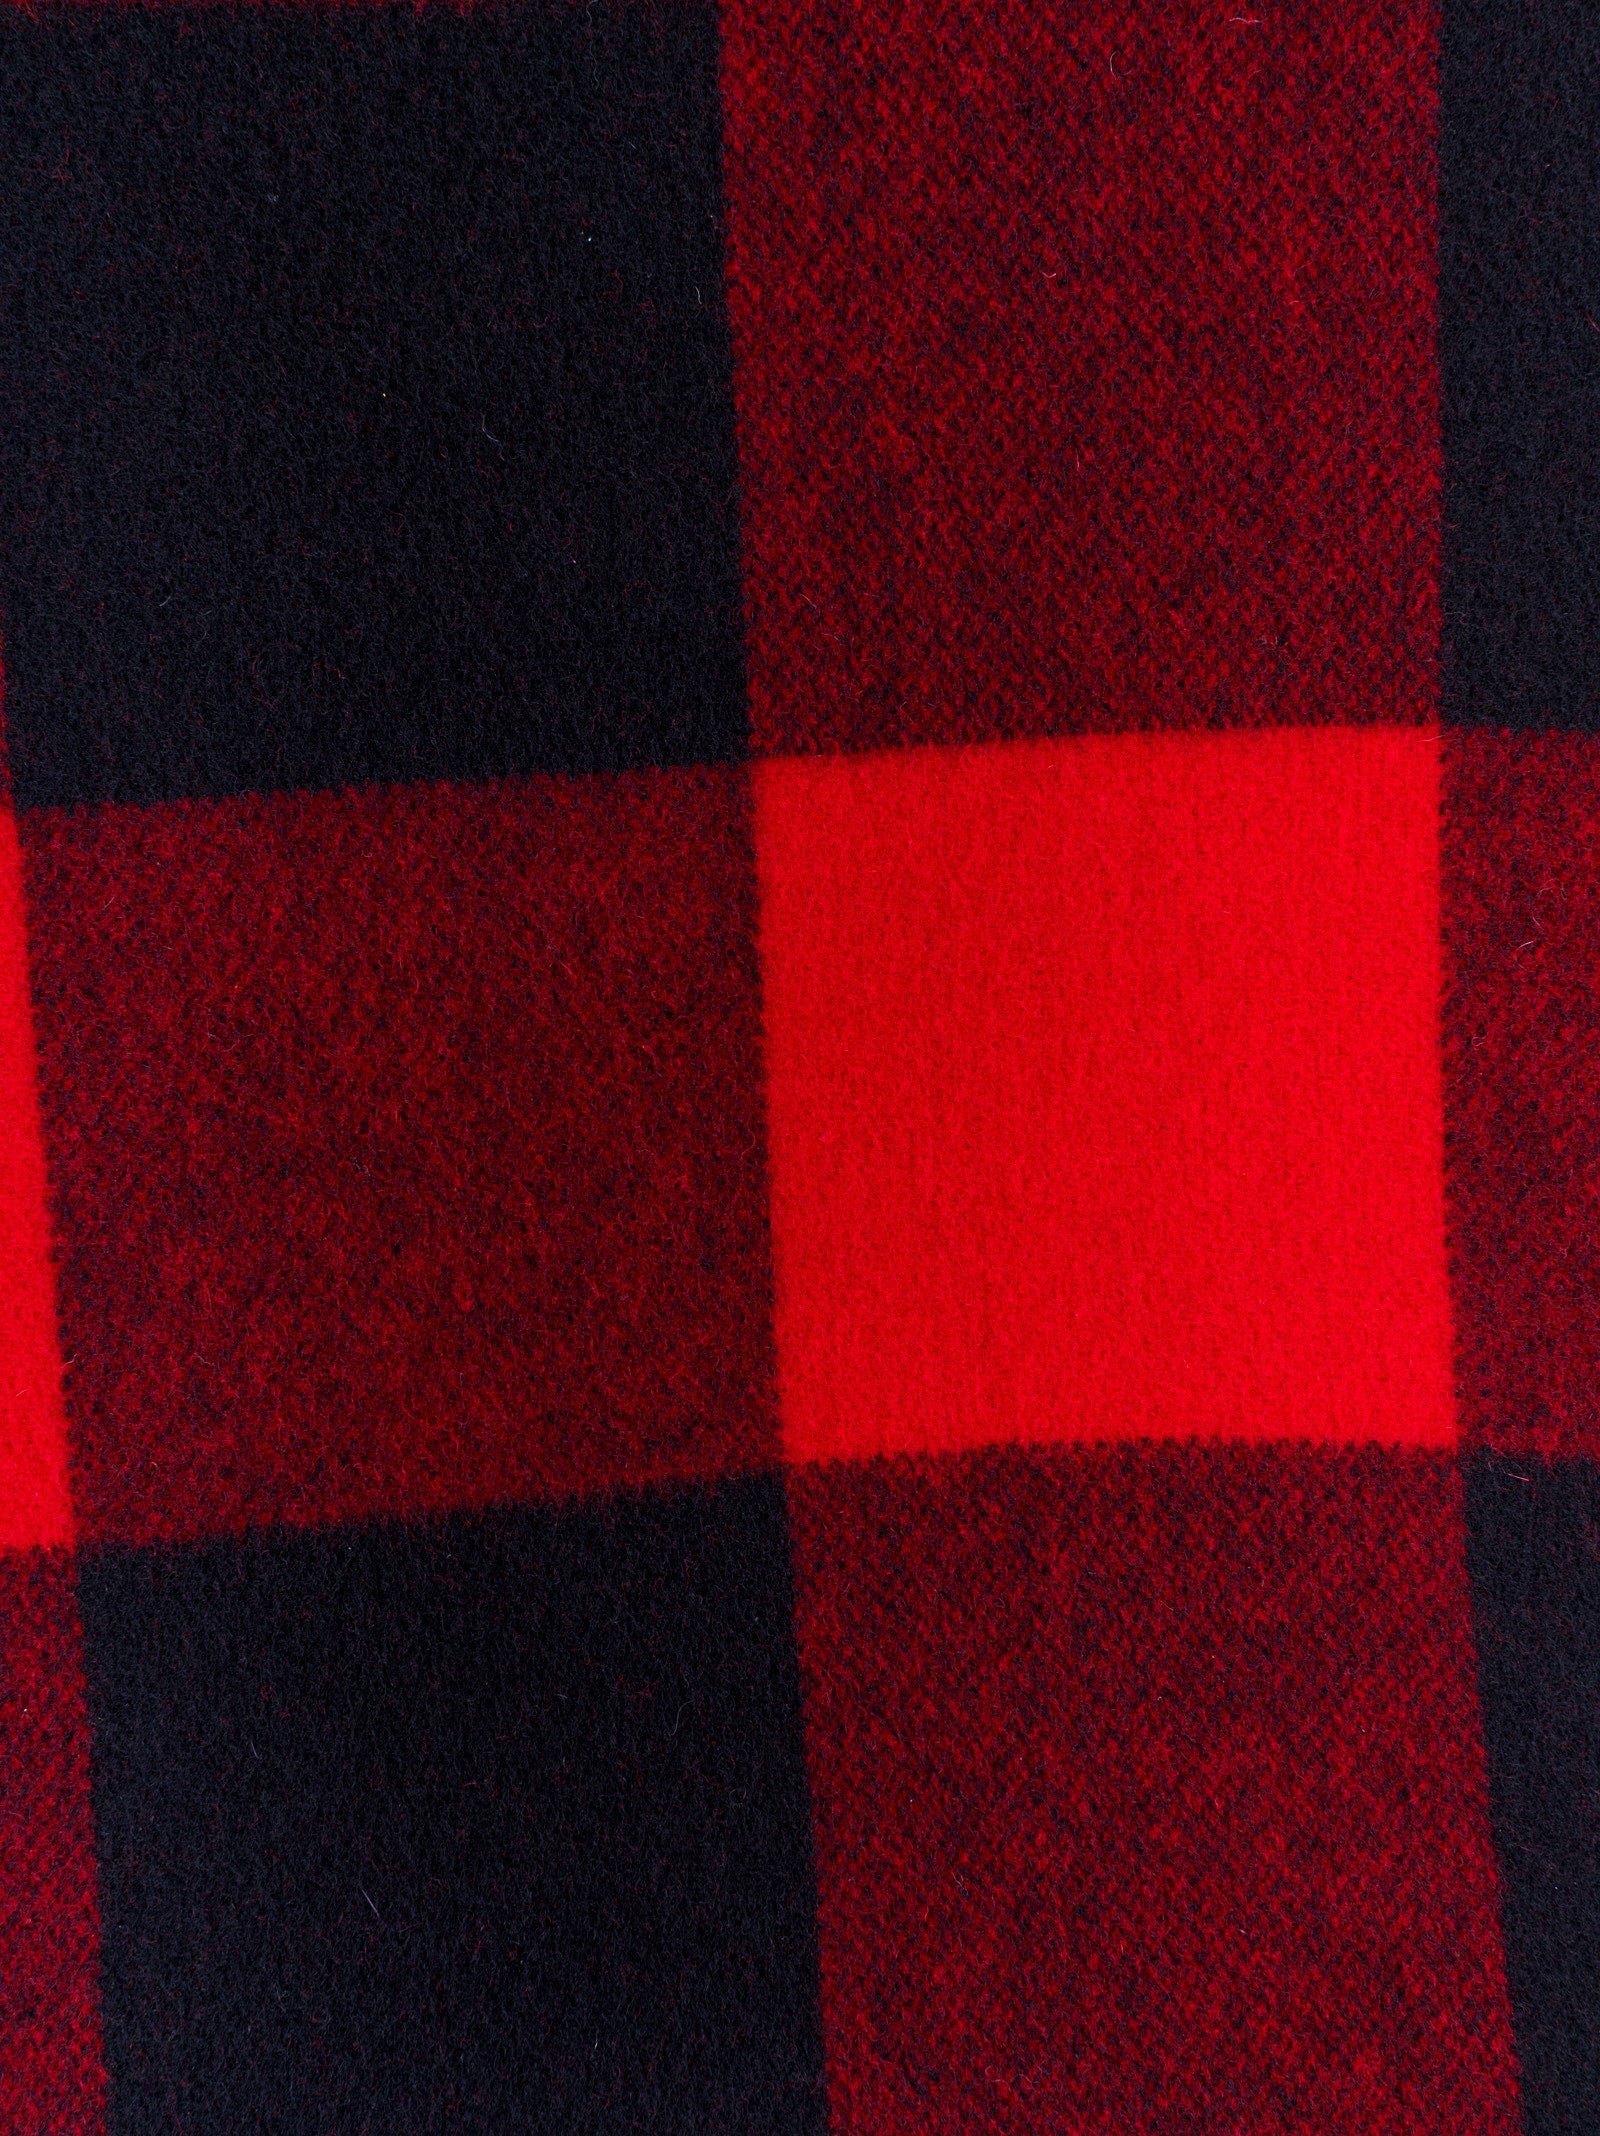 Plaid WOOLRICH
Rosso